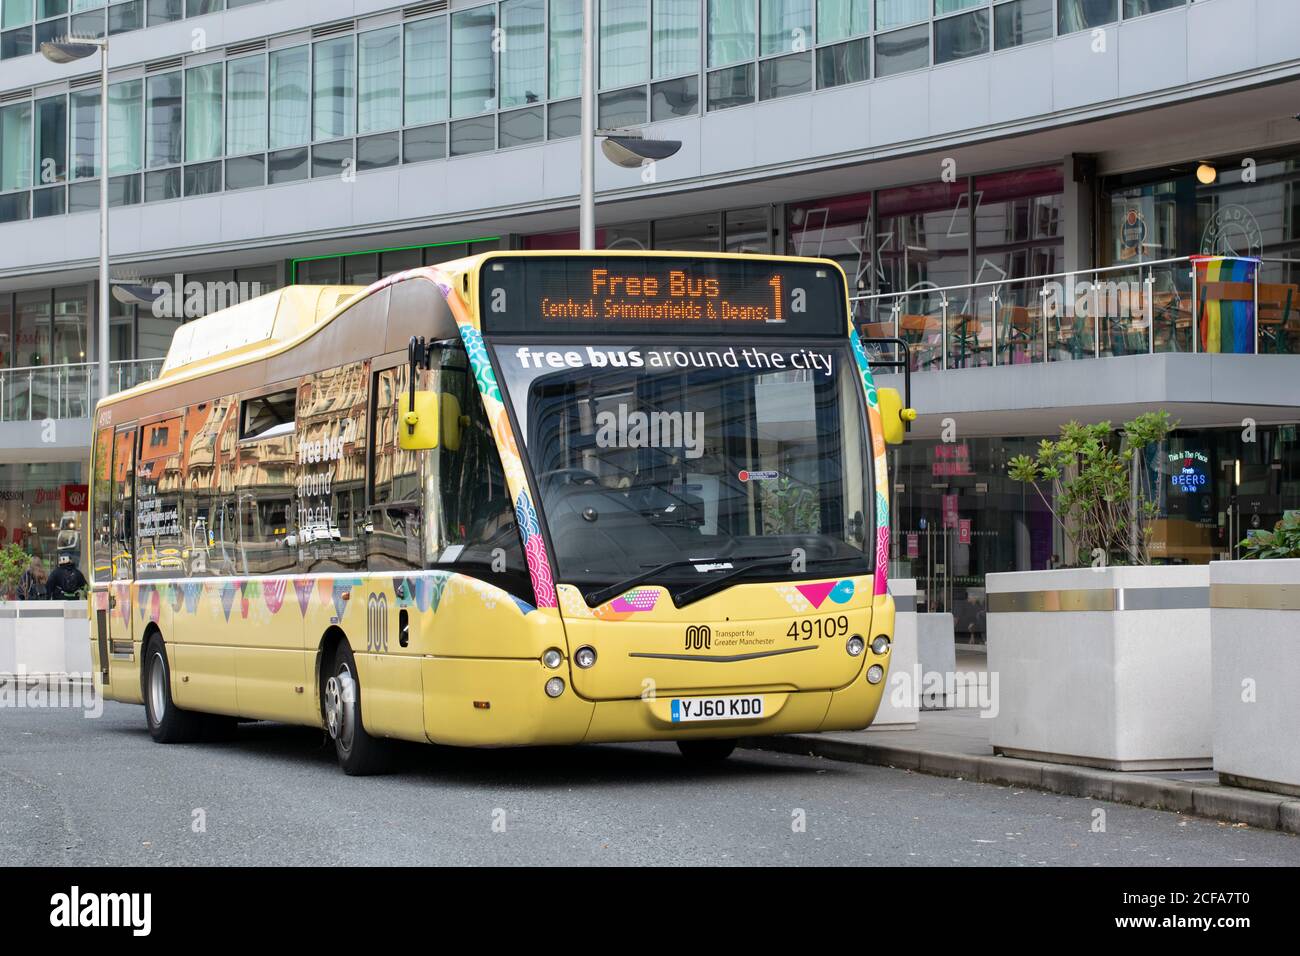 Free bus service at Manchester Piccadilly train station UK. Yellow bus with curved facade of office building in background. Diesel electric hybrid. Stock Photo